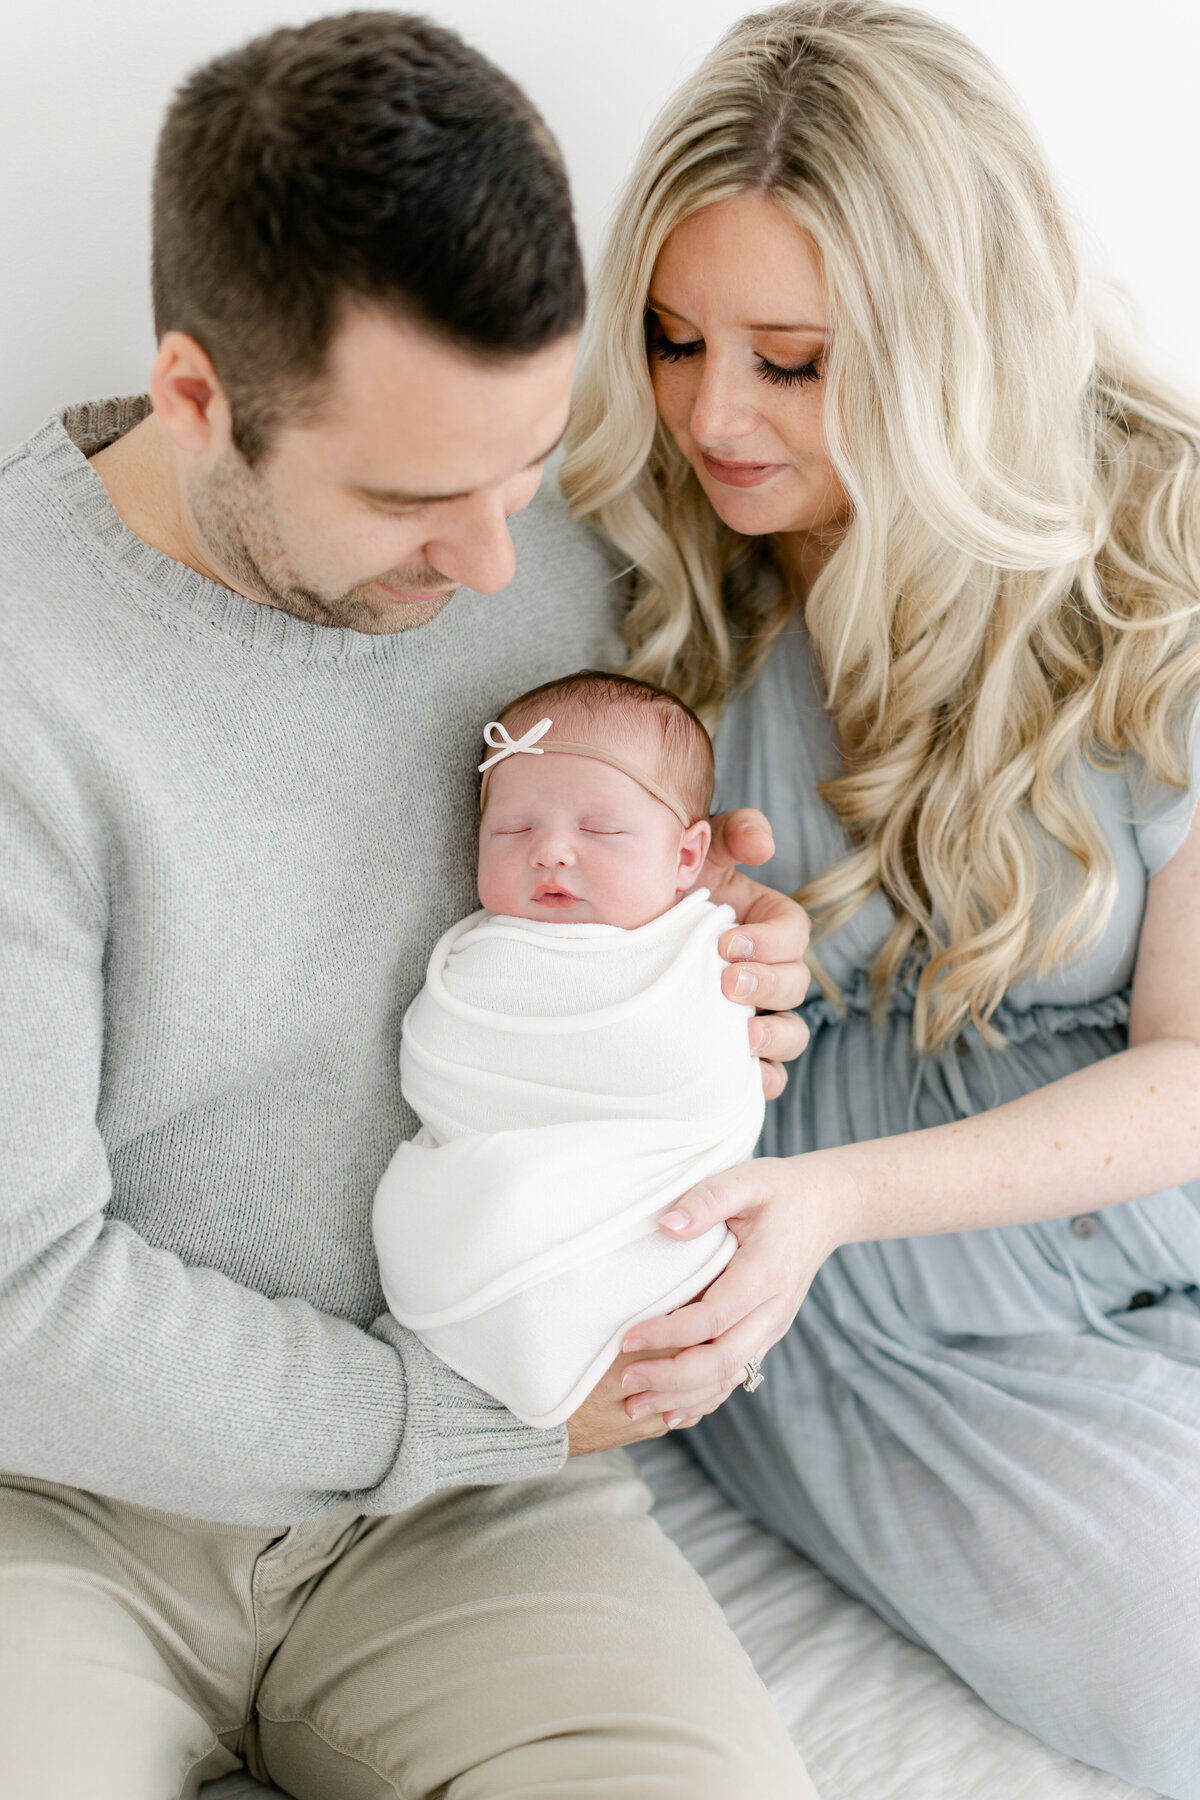 Dad and mom holding their baby girl dressed in neutral tones and cool blues for their newborn session photographed by Philadelphia Newborn Photographer Tara Federico